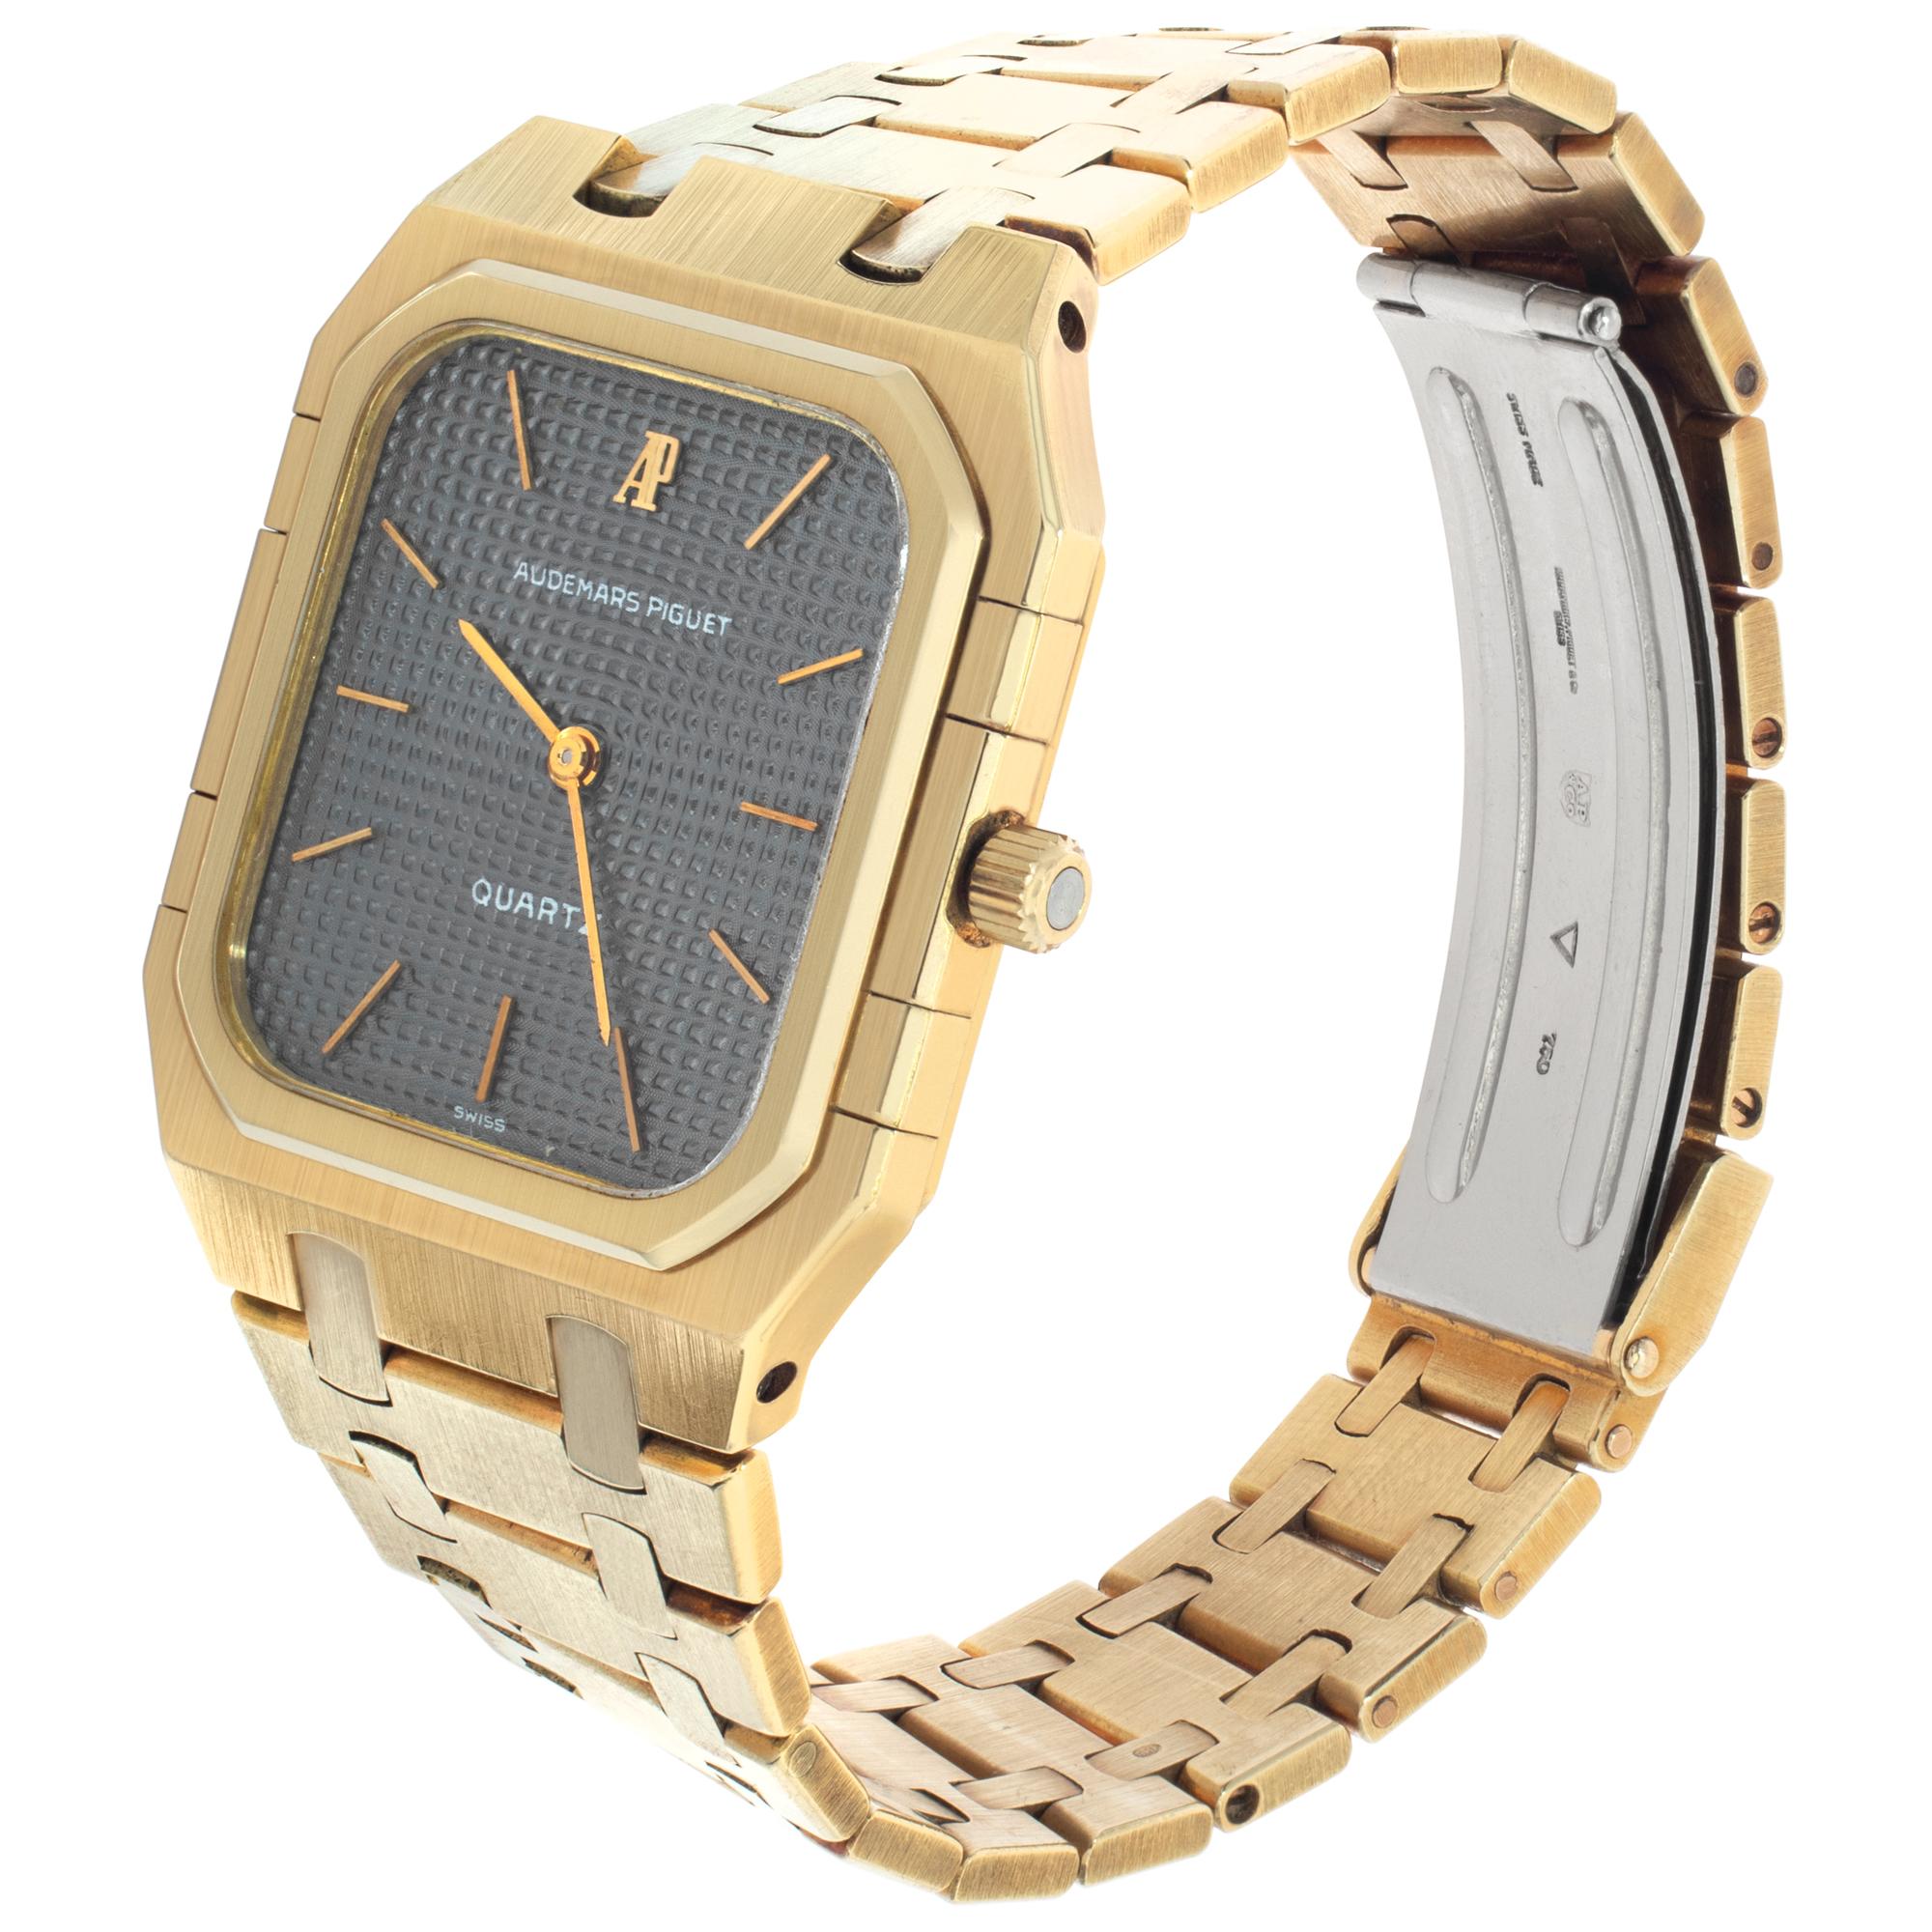 Audemars Piguet Jumbo Royal Oak Rectangular in 18k yellow gold. Quartz. Measures 35mm long (lug to lug) by 32mm wide. With service box. Ref 6005BA. Fine Pre-owned Audemars Piguet Watch.

 Certified preowned Dress Audemars Piguet Royal 6005BA watch